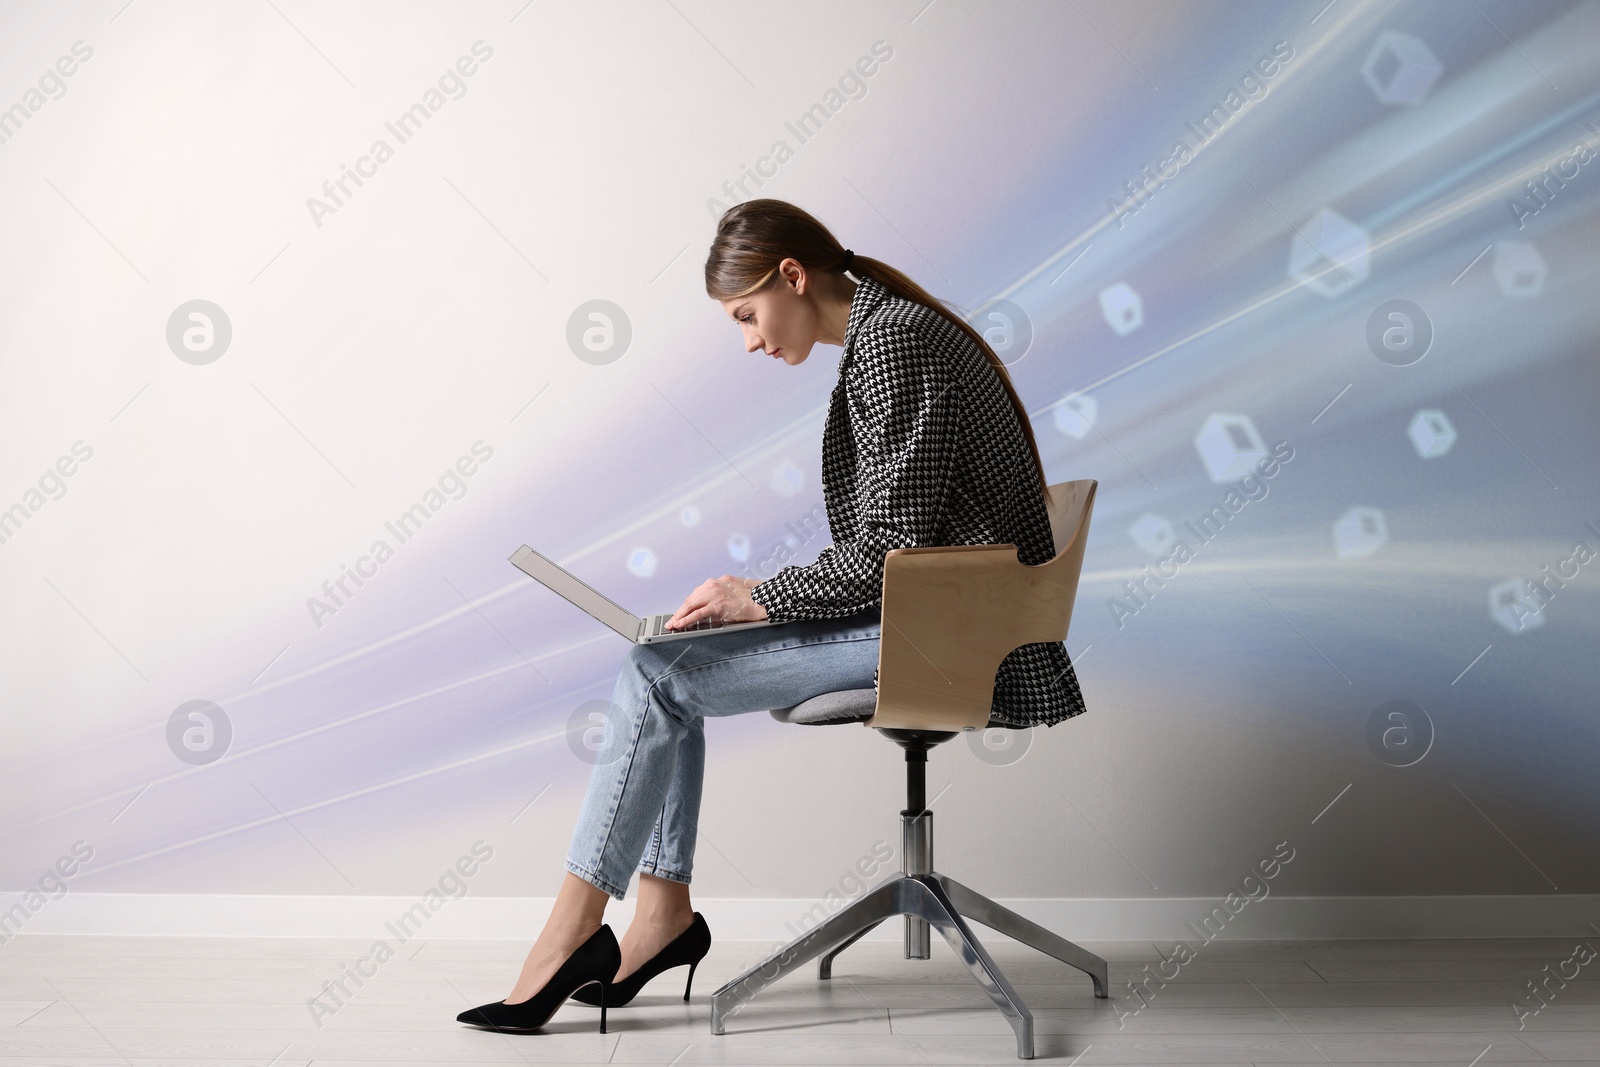 Image of Speed internet. Woman using laptop in chair near light grey wall. Motion blur effect symbolizing fast connection